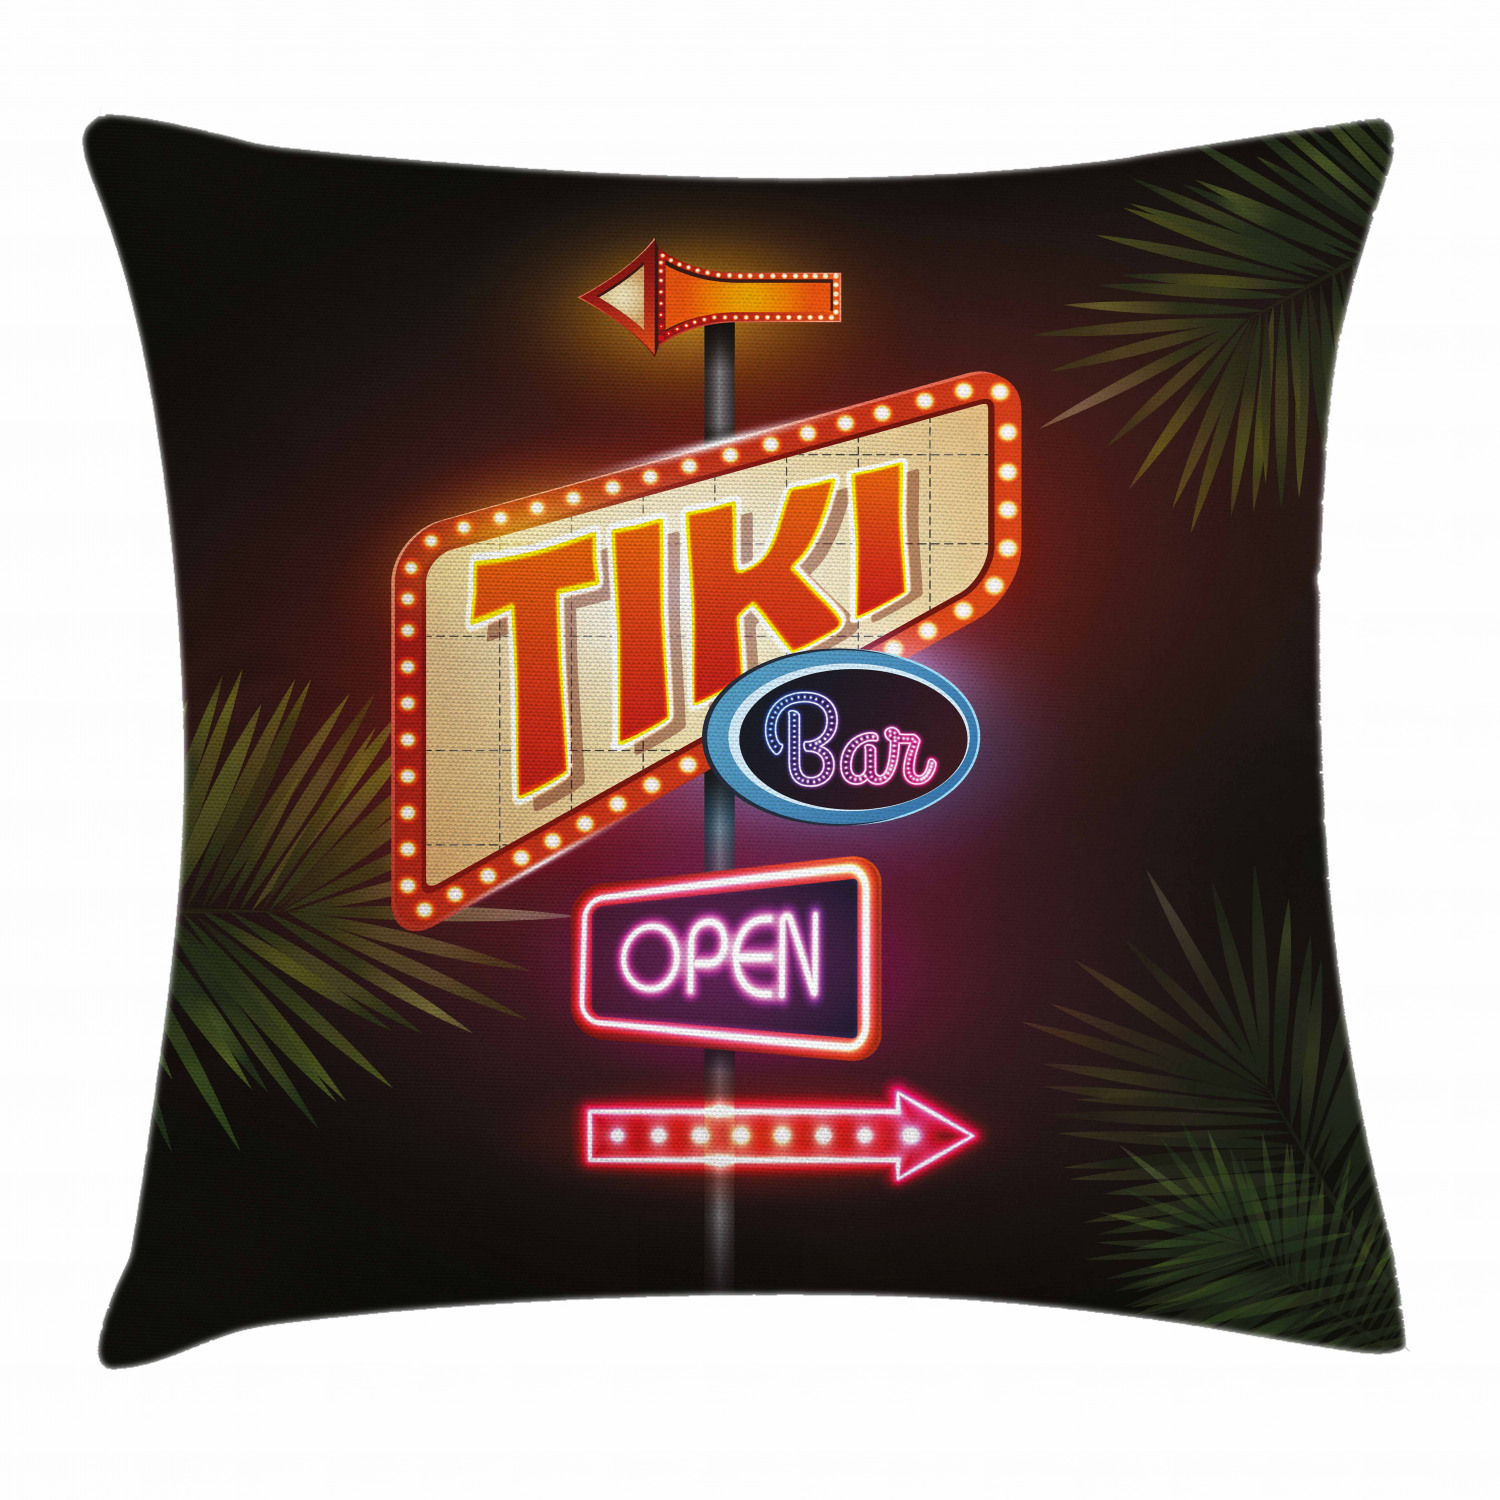 Tiki Bar Decor Throw Pillow Cushion Cover, Old Fashioned Neon Signs Illustration Open Bar Palm Tree Branches Roadside, Decorative Square Accent Pillow Case, 16 X 16 Inches, Multicolor, by Ambesonne - image 1 of 2